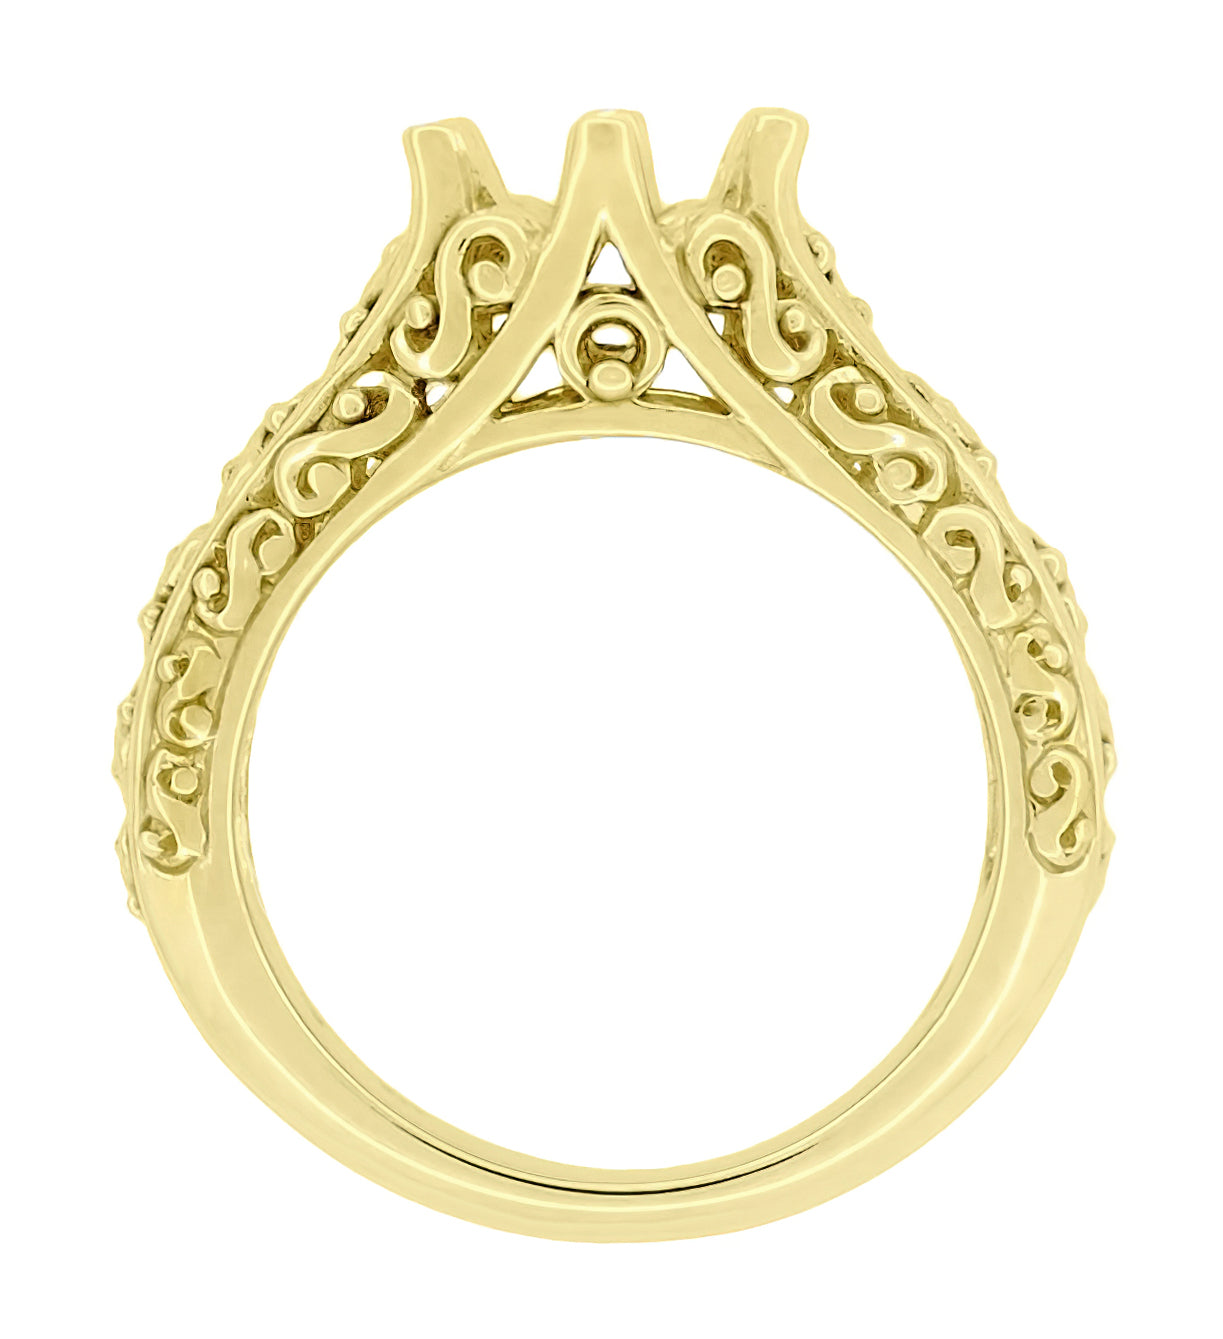 Flowing Scrolls Edwardian 14K Yellow Gold Filigree Antique Style Engagement Ring Mounting for a 1.25 - 2.00 Carat Diamond - Item: R1196Y125 - Image: 2